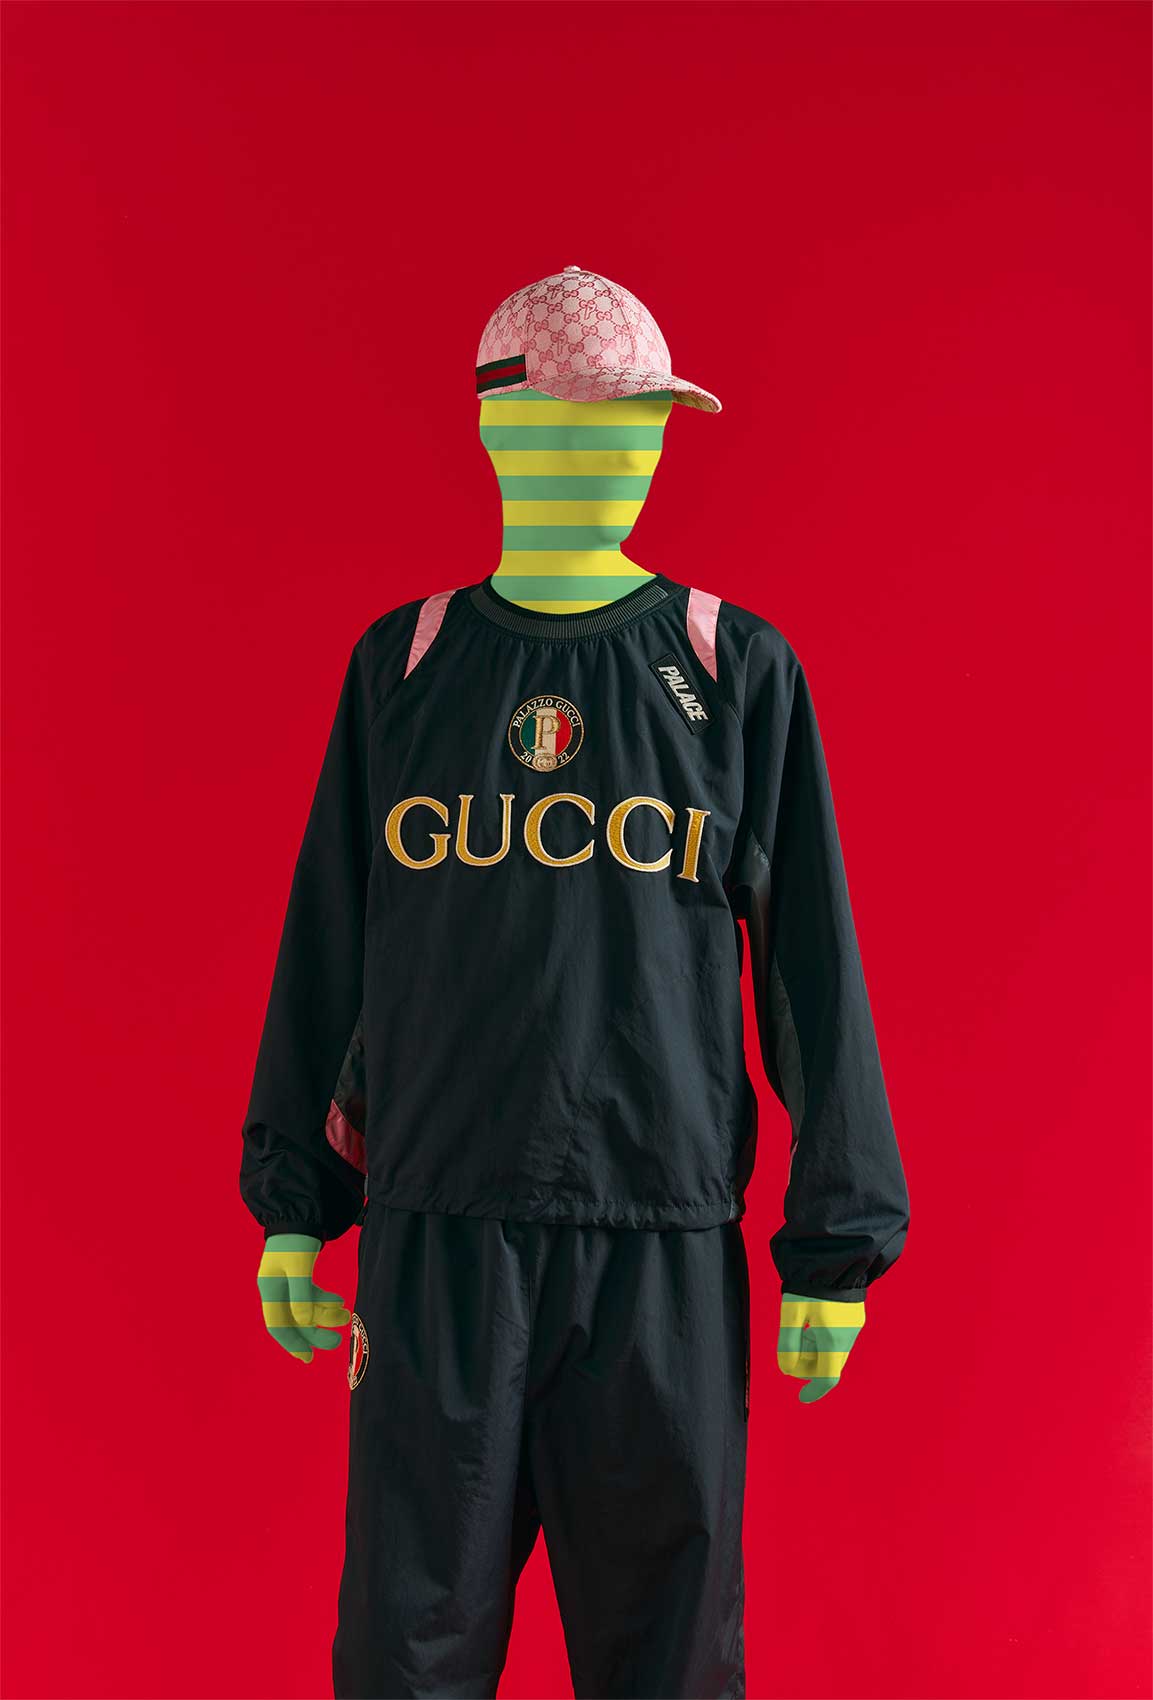 Shop The Palace Gucci Collaboration Now